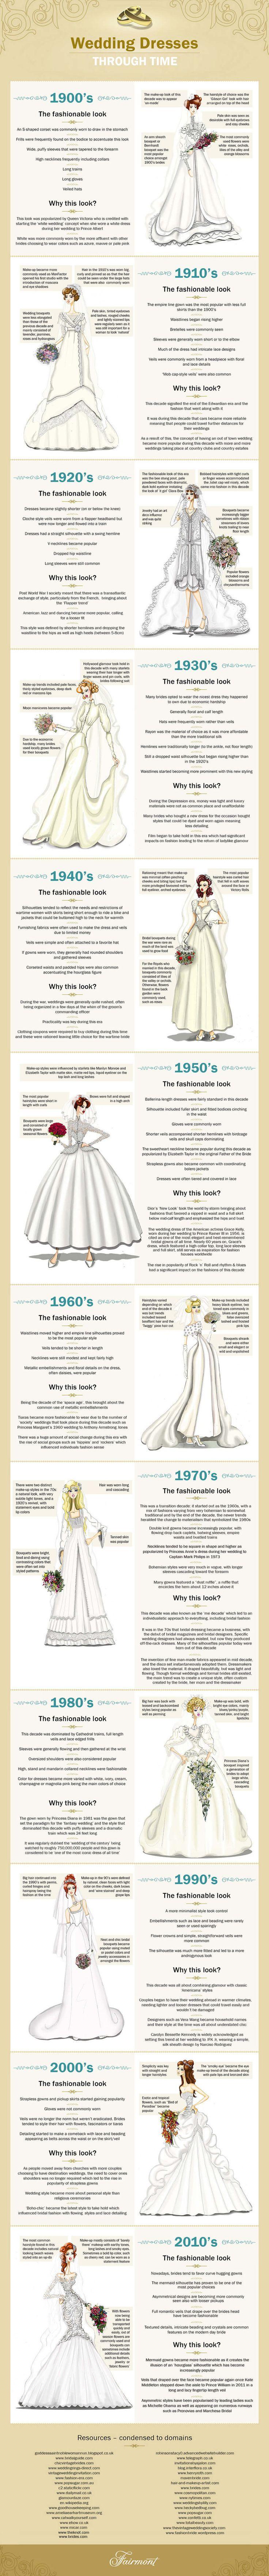 Wedding - Here's A Graphic Of How Much Wedding Dresses Have Changed In A Century